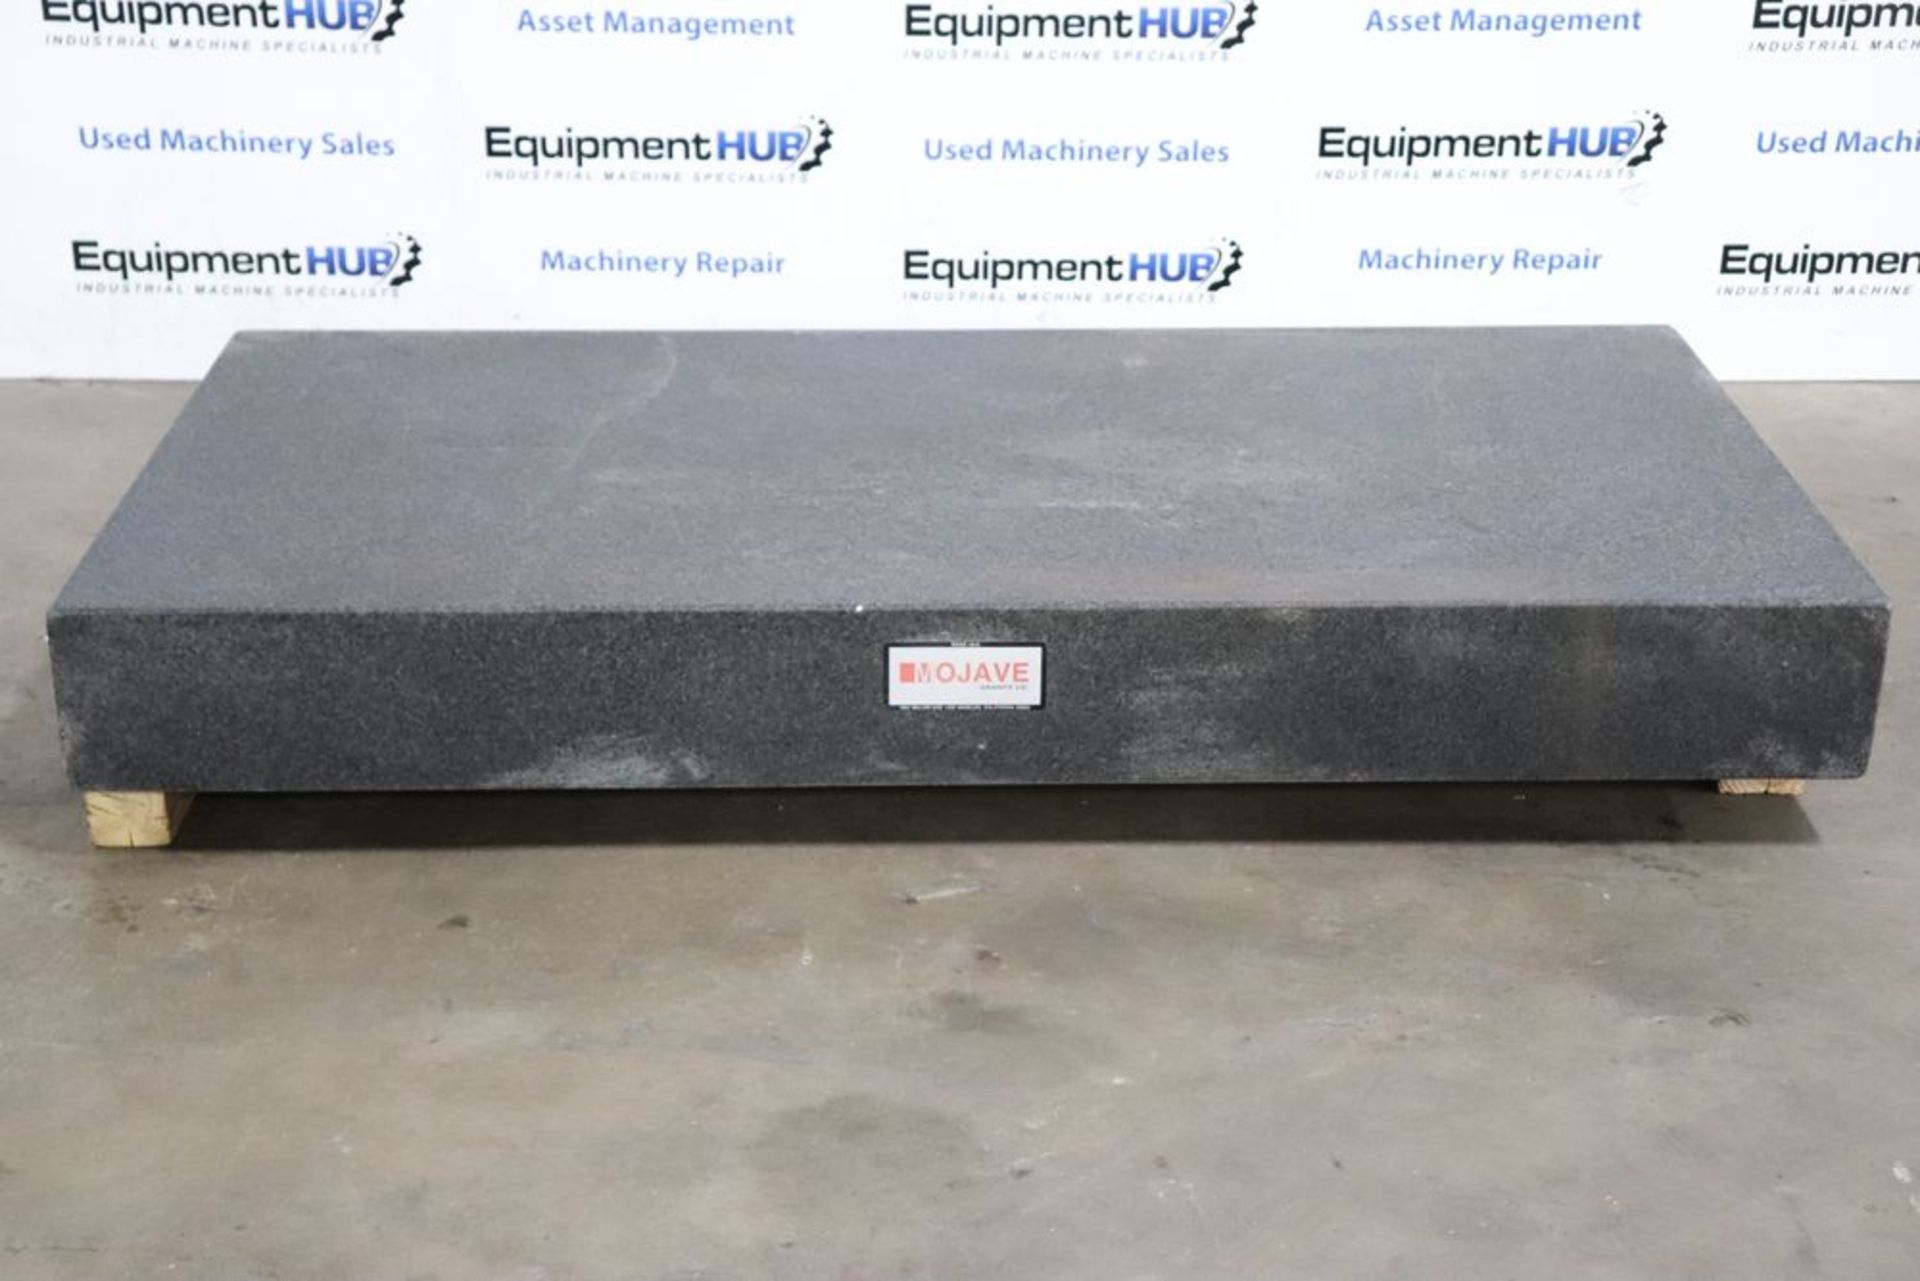 Mojave 72″ x 36″ x 8″ Granite Surface Inspection Plate